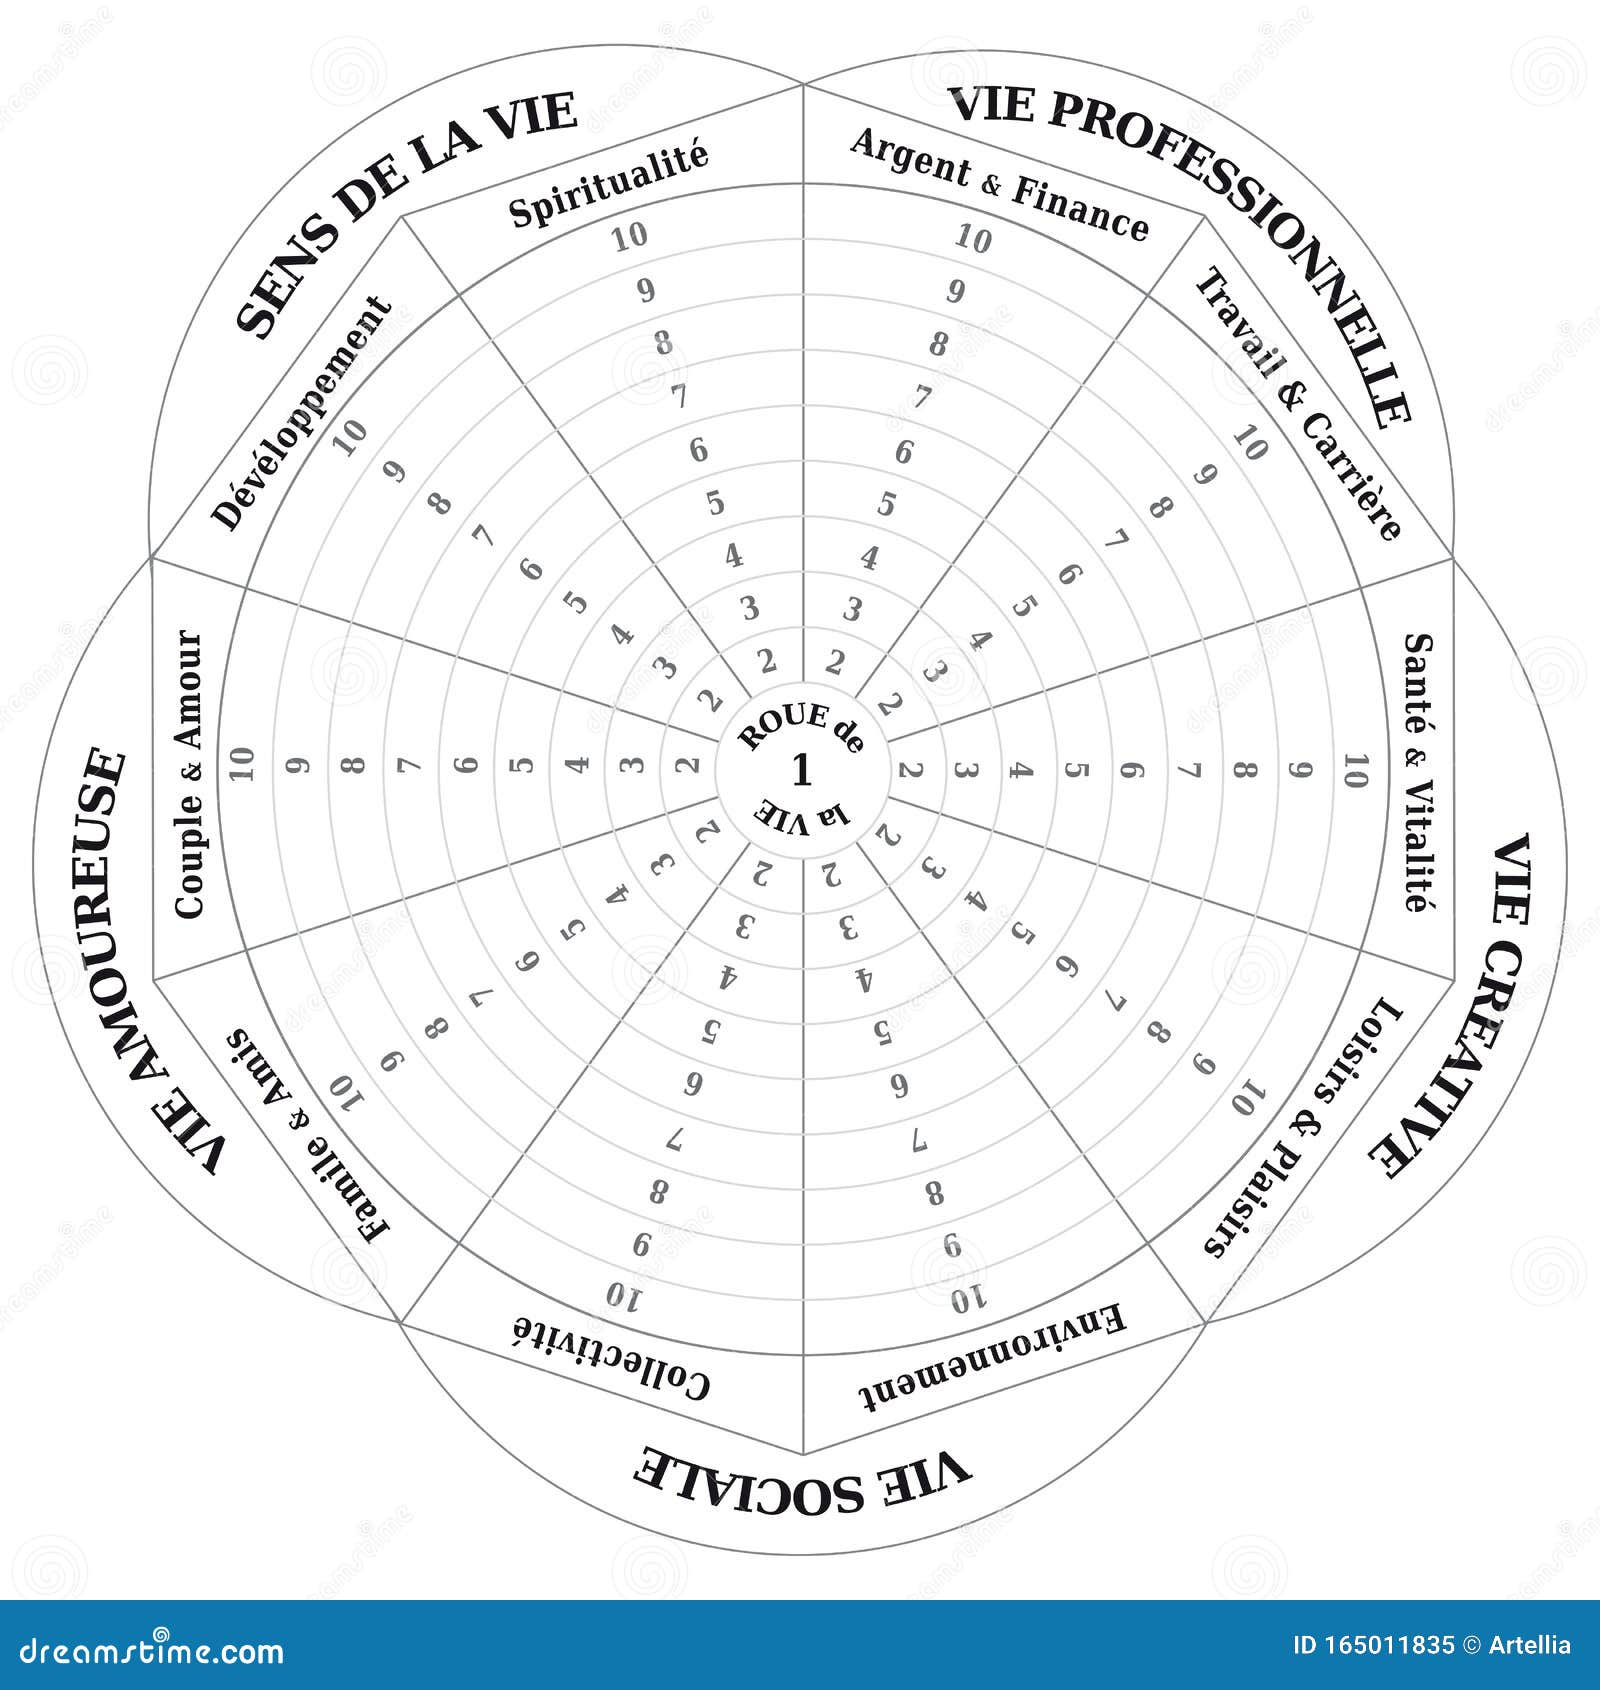 Wheel of Life - Diagram - Coaching Tool in Black and White In Blank Wheel Of Life Template